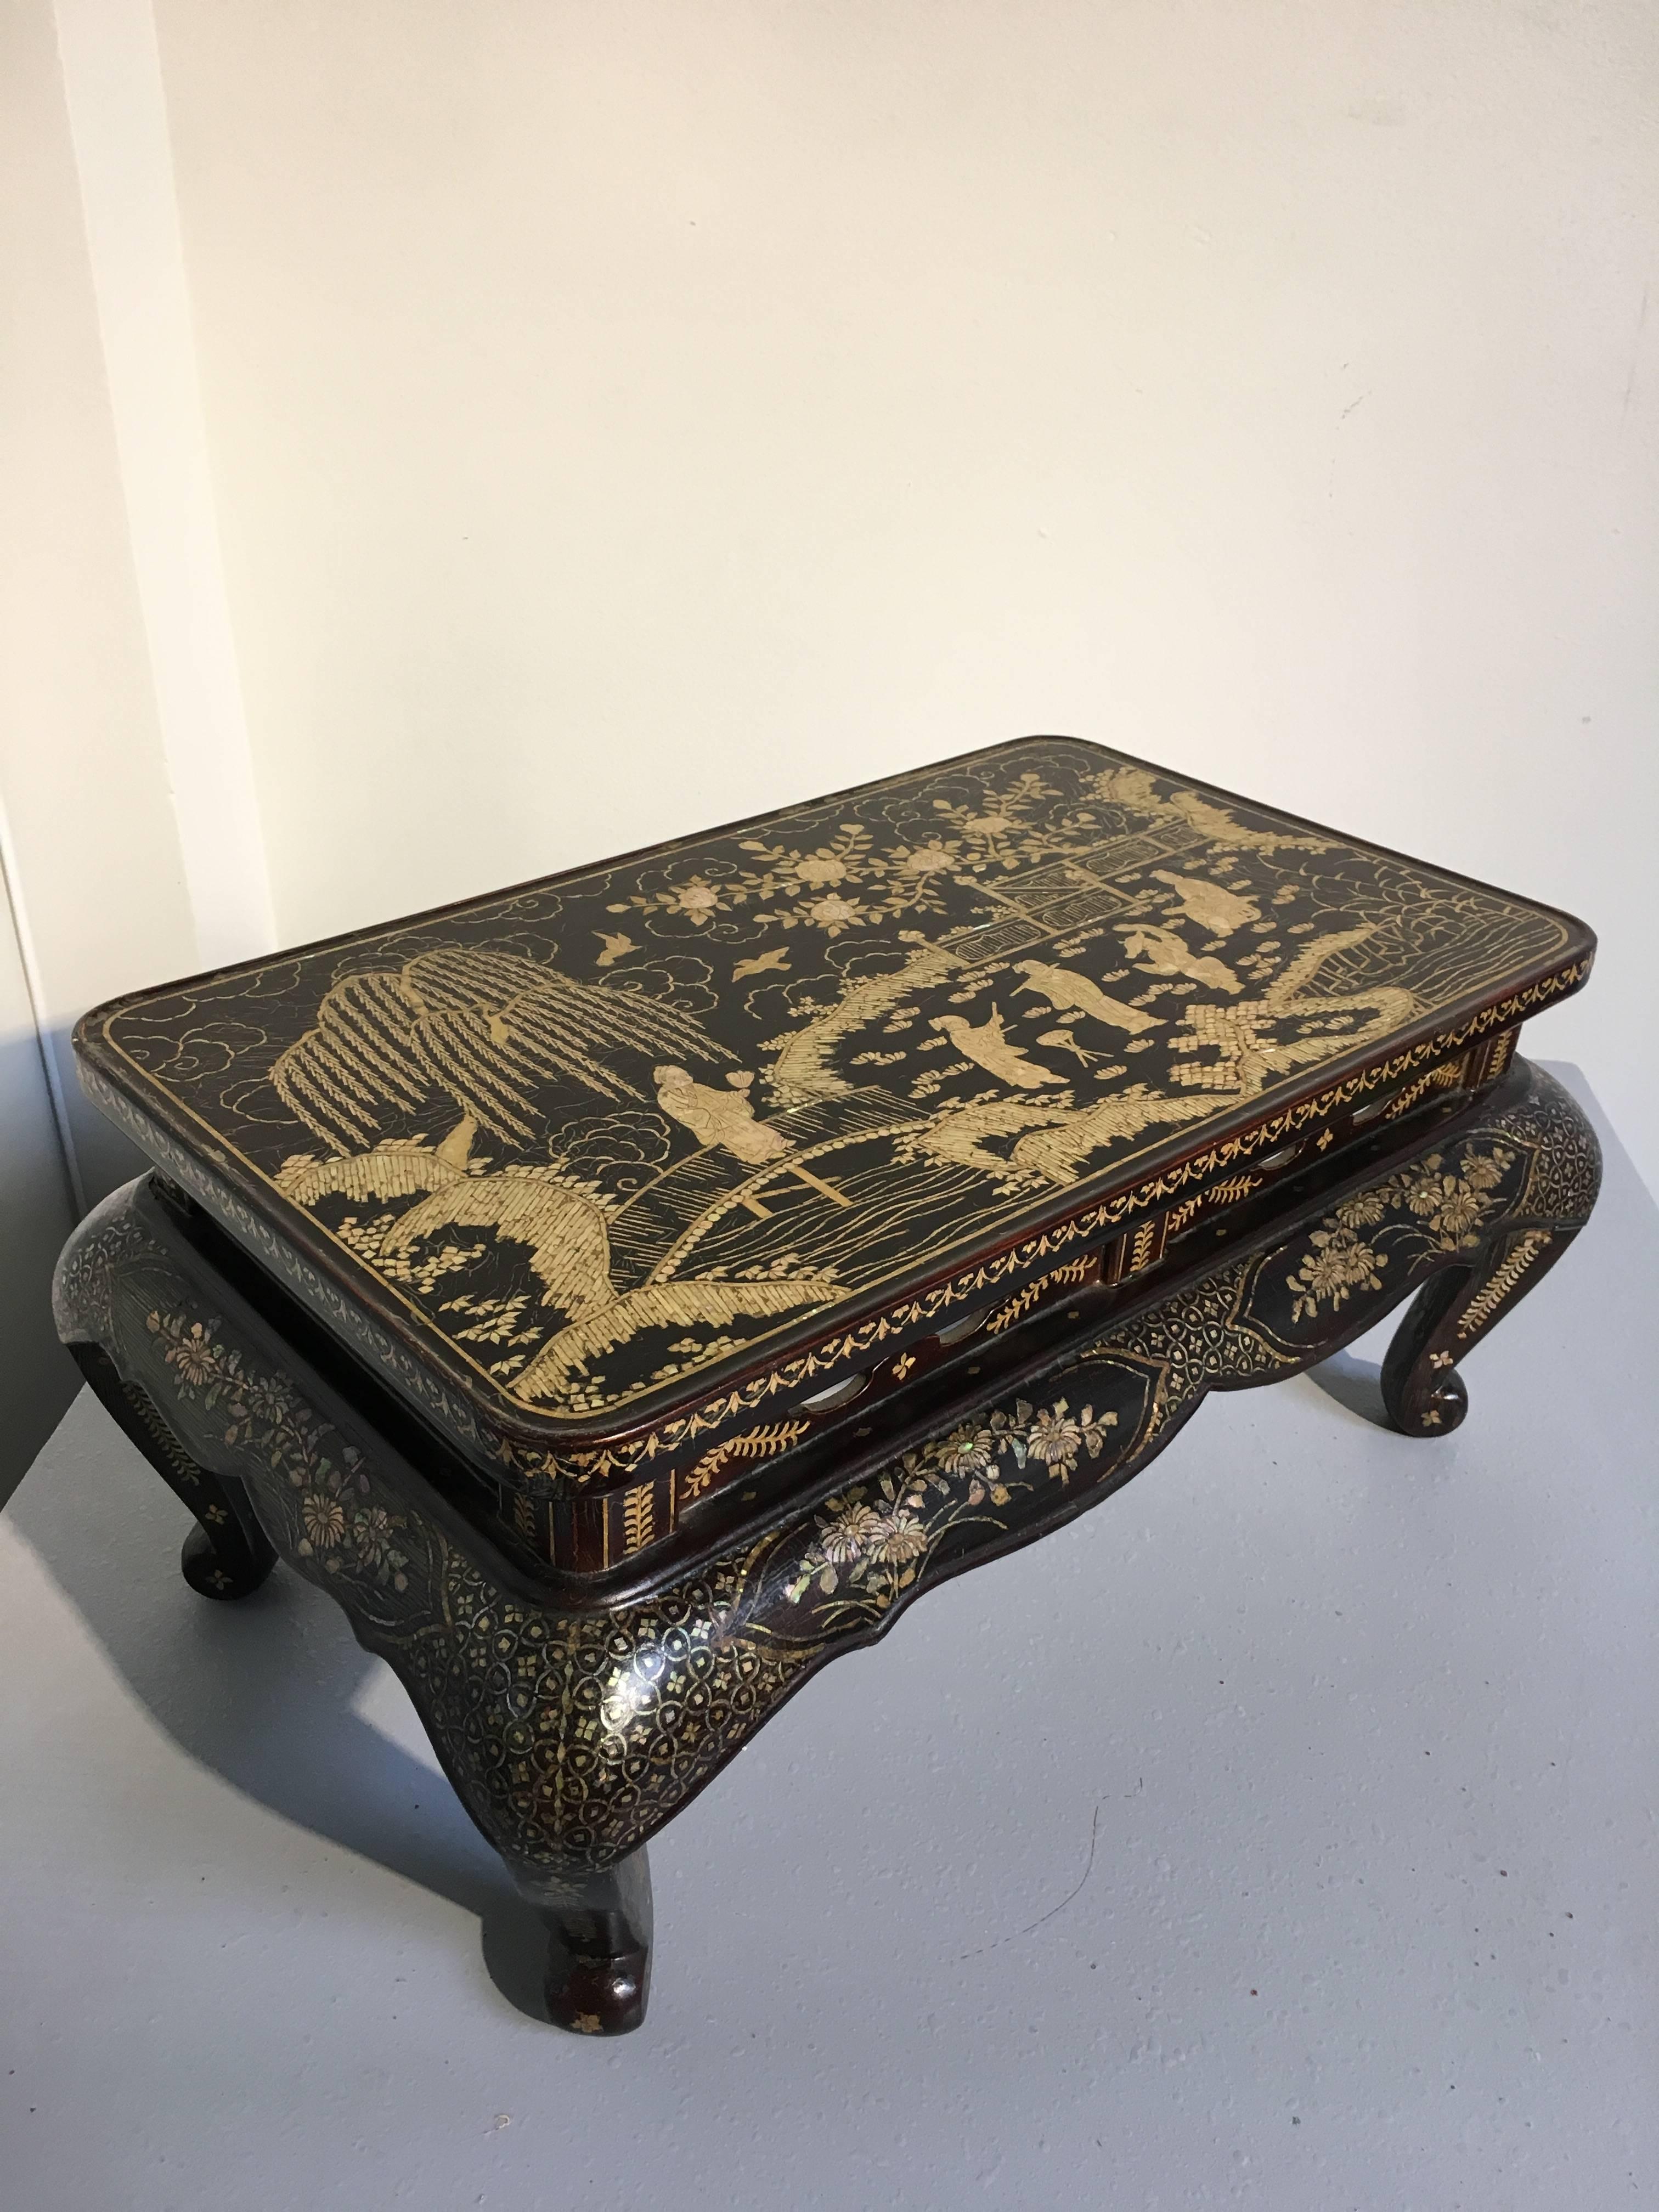 Qing Dynasty Chinese Lacquer and Mother-of-Pearl Small Table, 18th-19th Century 4